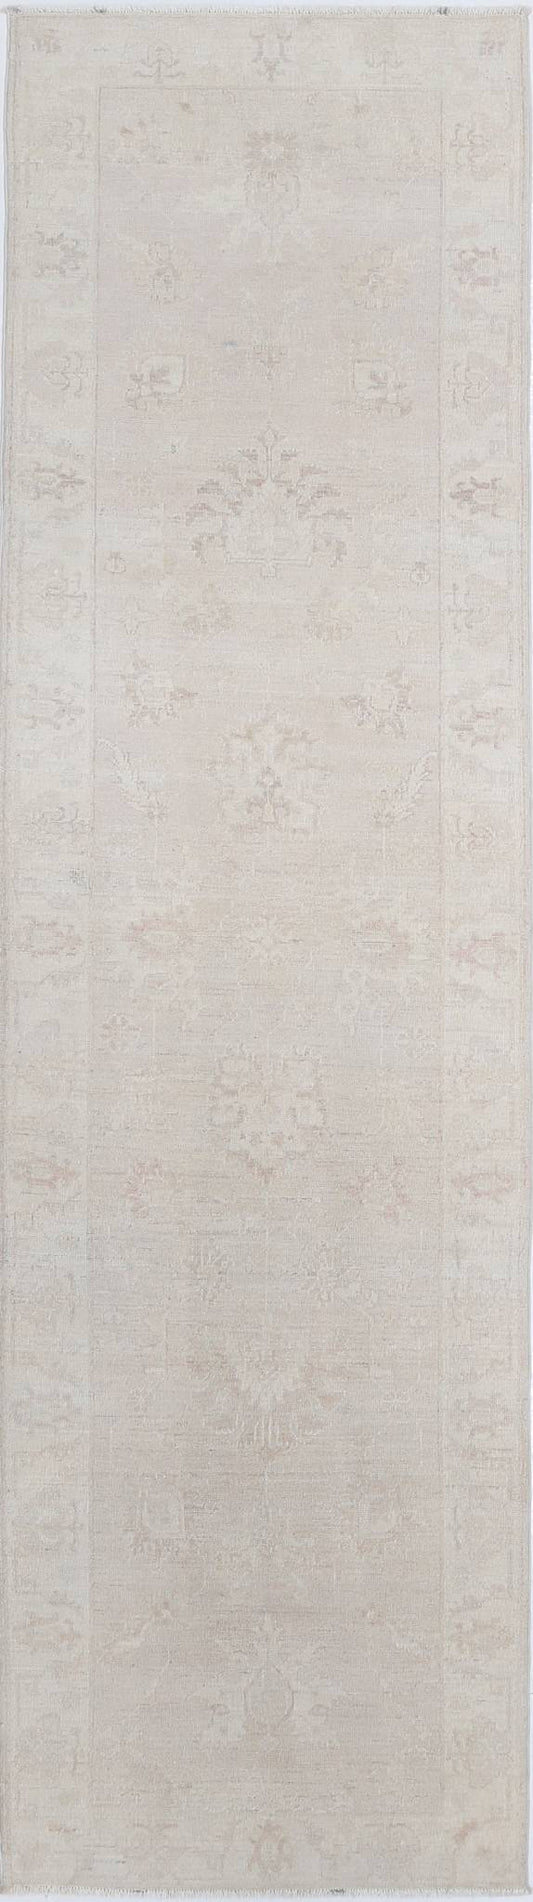 Traditional Hand Knotted Serenity Farhan Wool Rug of Size 2'8'' X 9'5'' in Grey and Ivory Colors - Made in Afghanistan